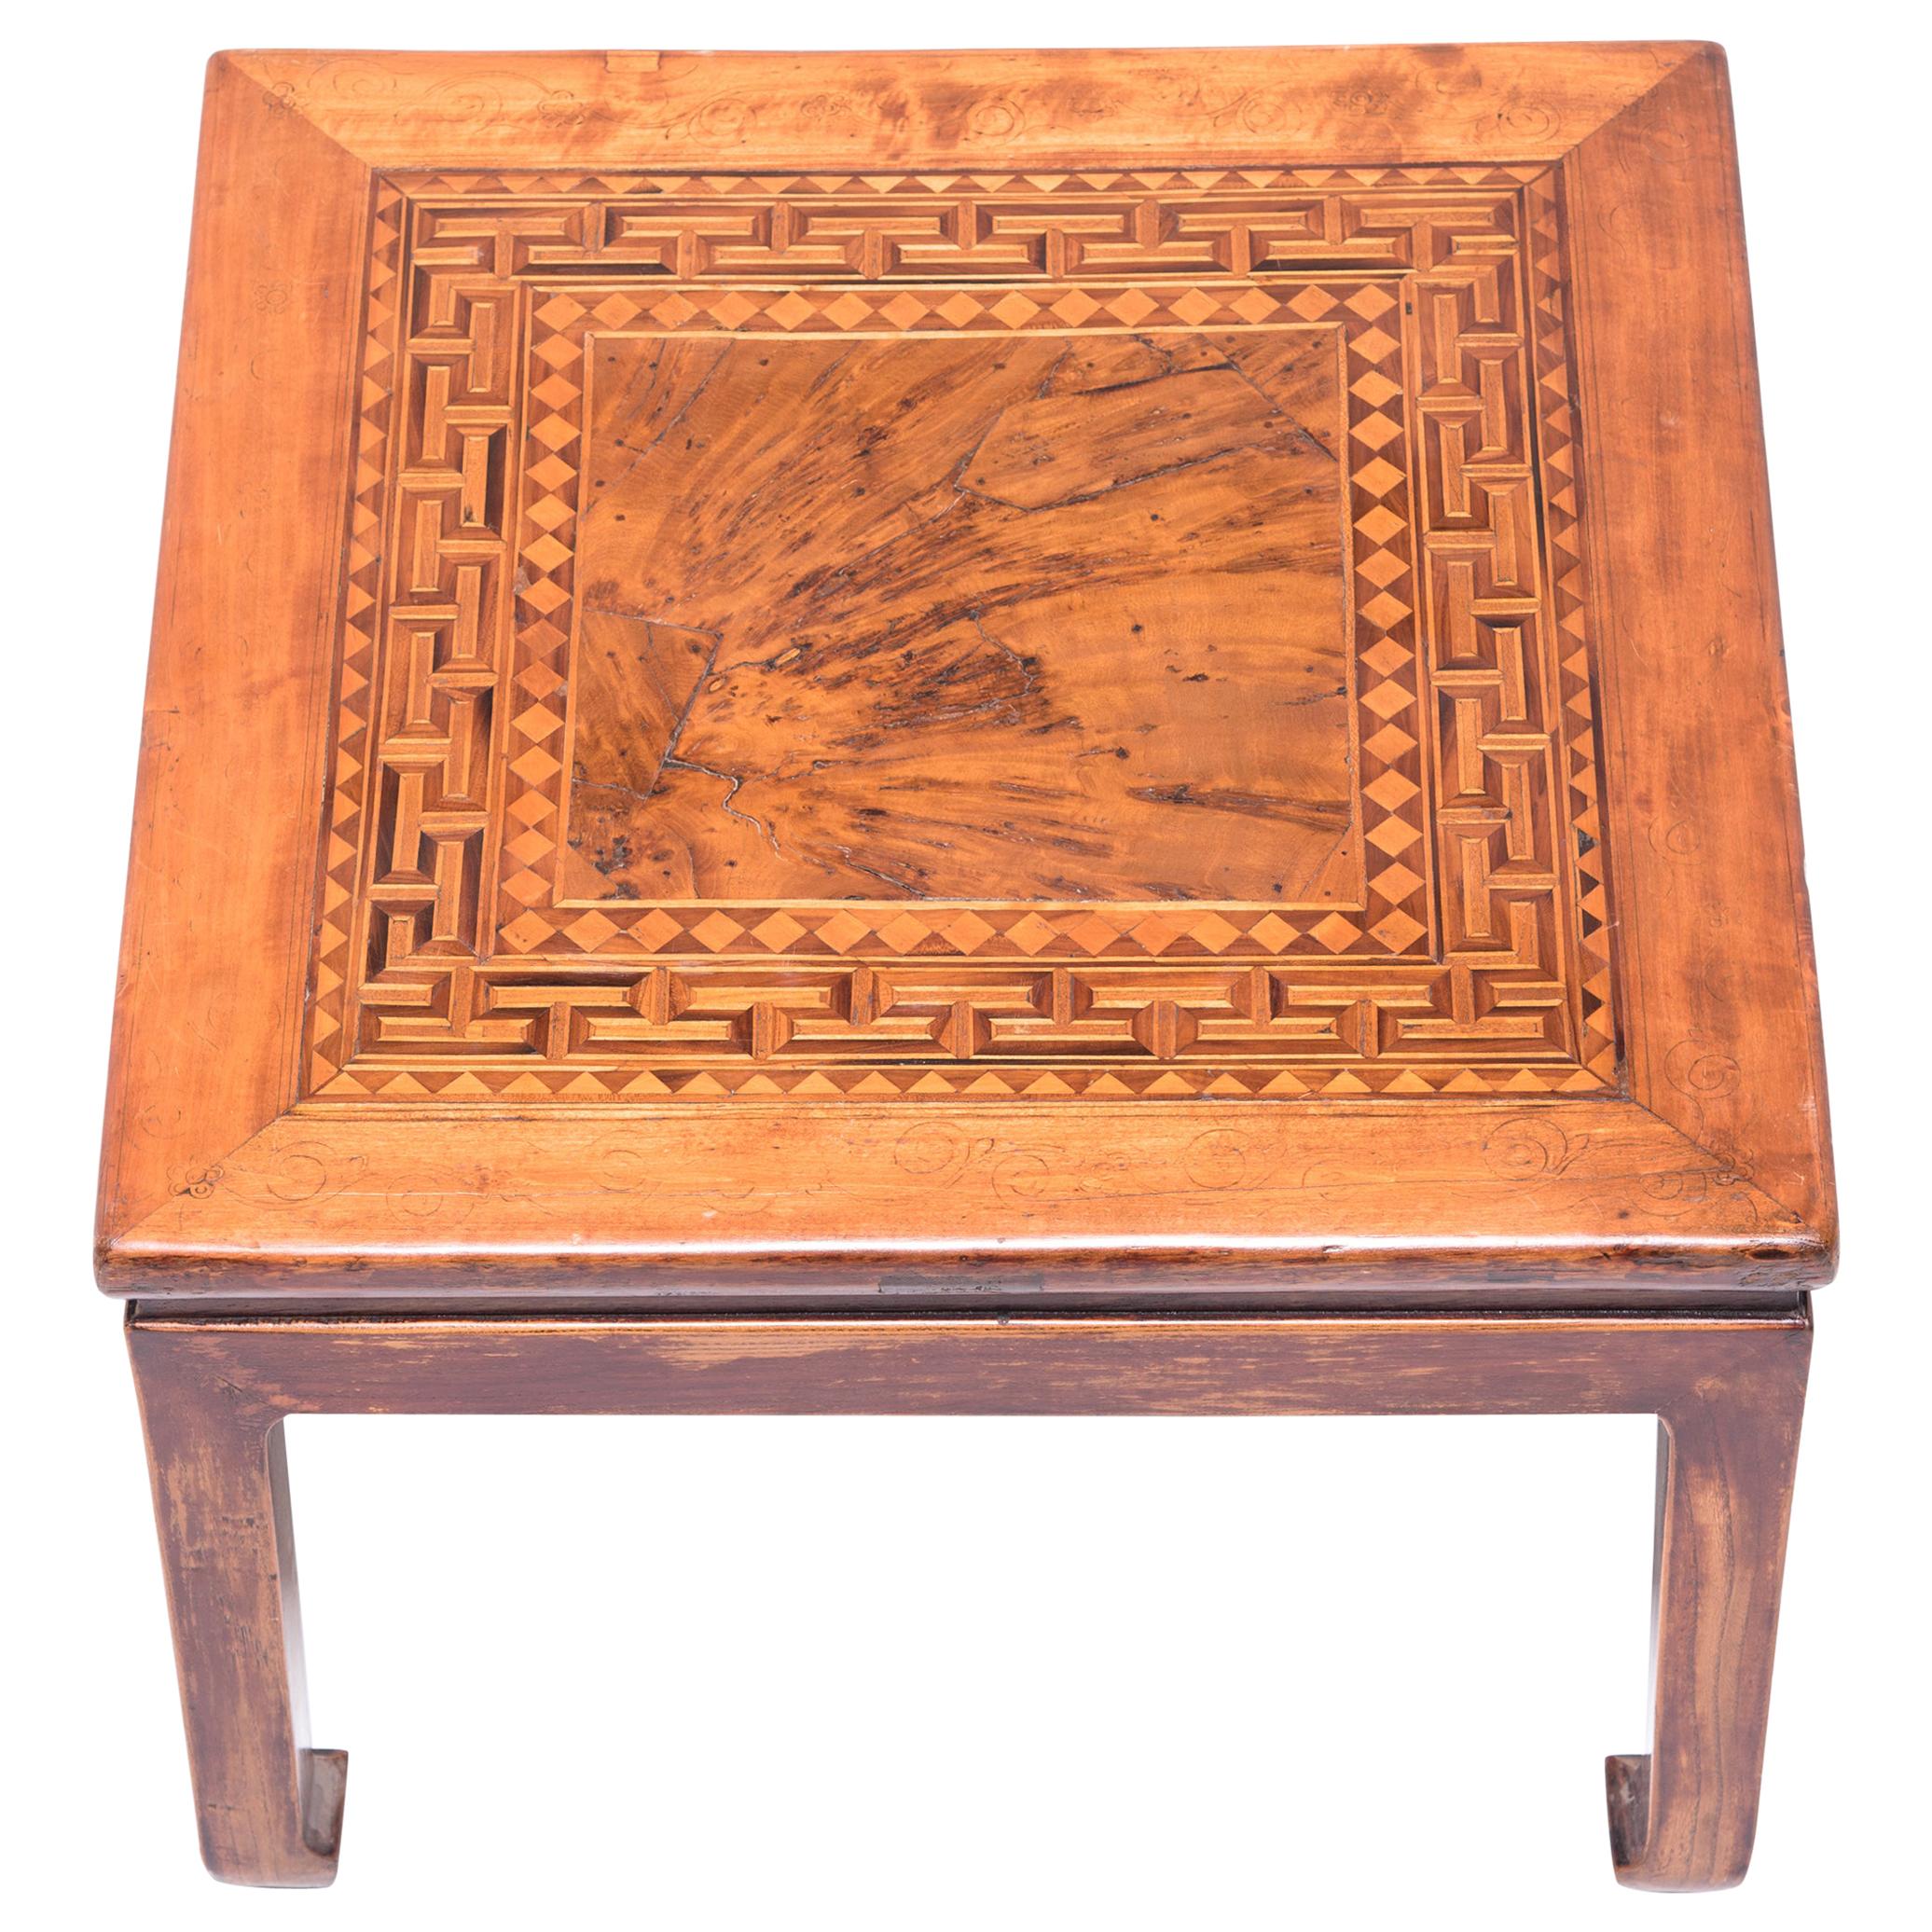 Low Square Table with Burl and Marquetry Inlay, c. 1900